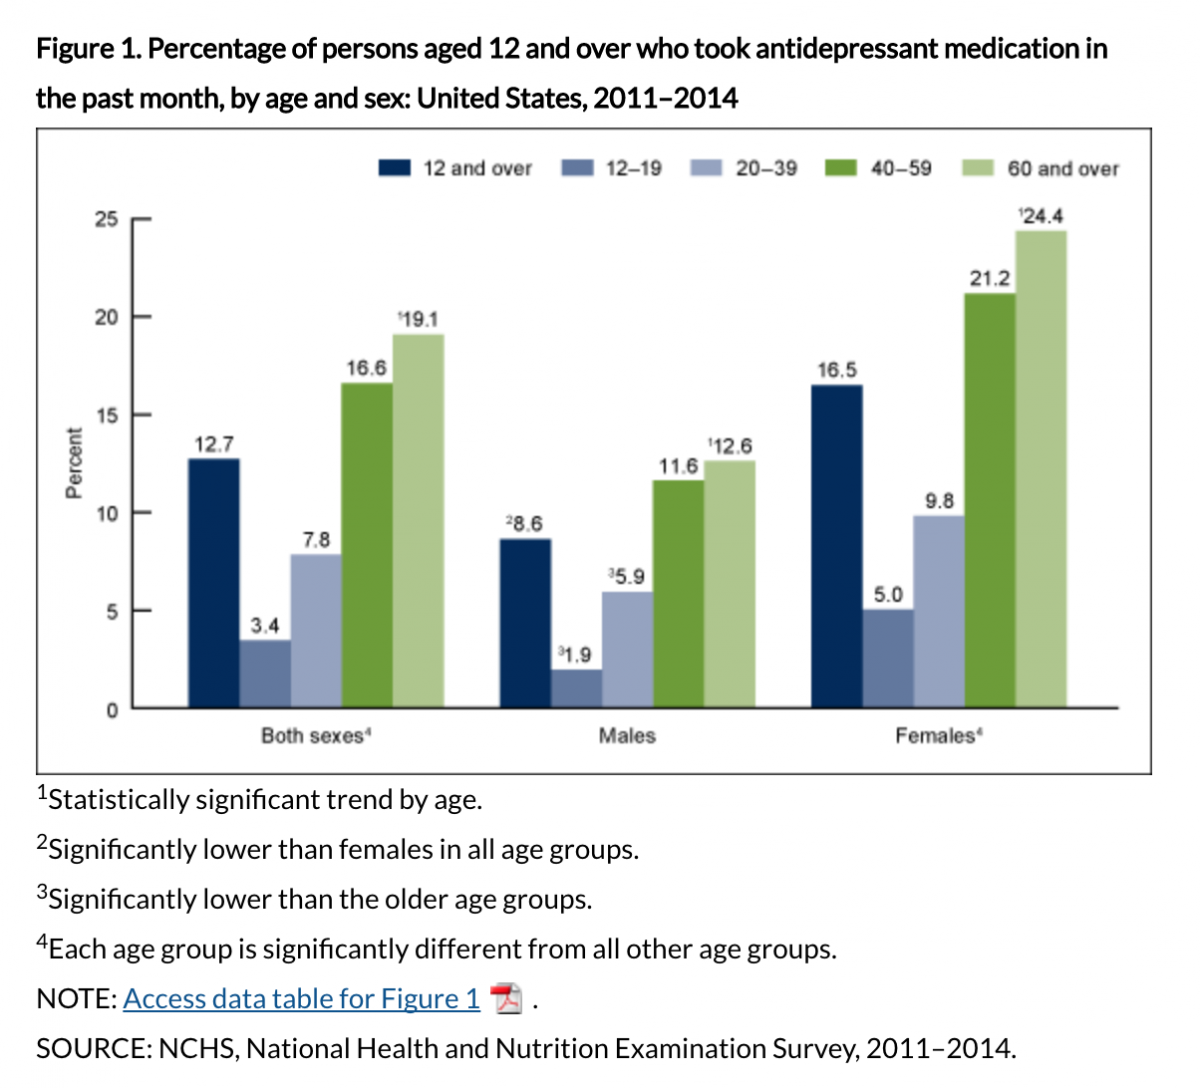 Anti-Depressant use in the United States, 2011-2014 from NCHS